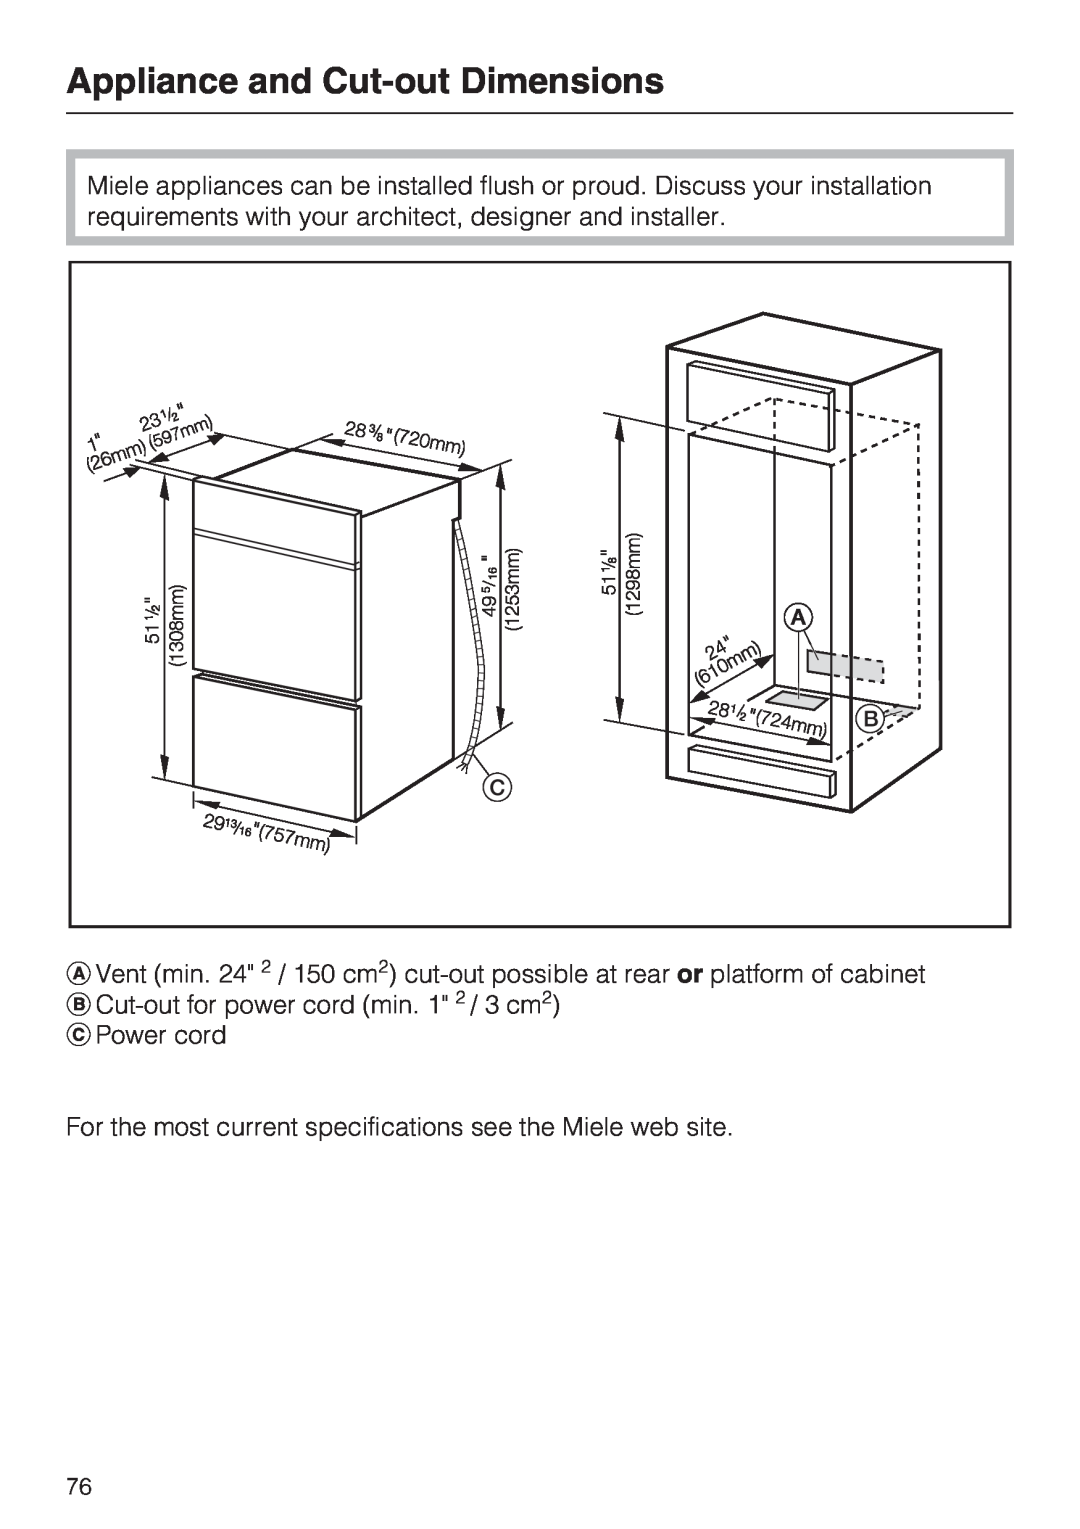 Miele H 4894 BP2 installation instructions Appliance and Cut-outDimensions 